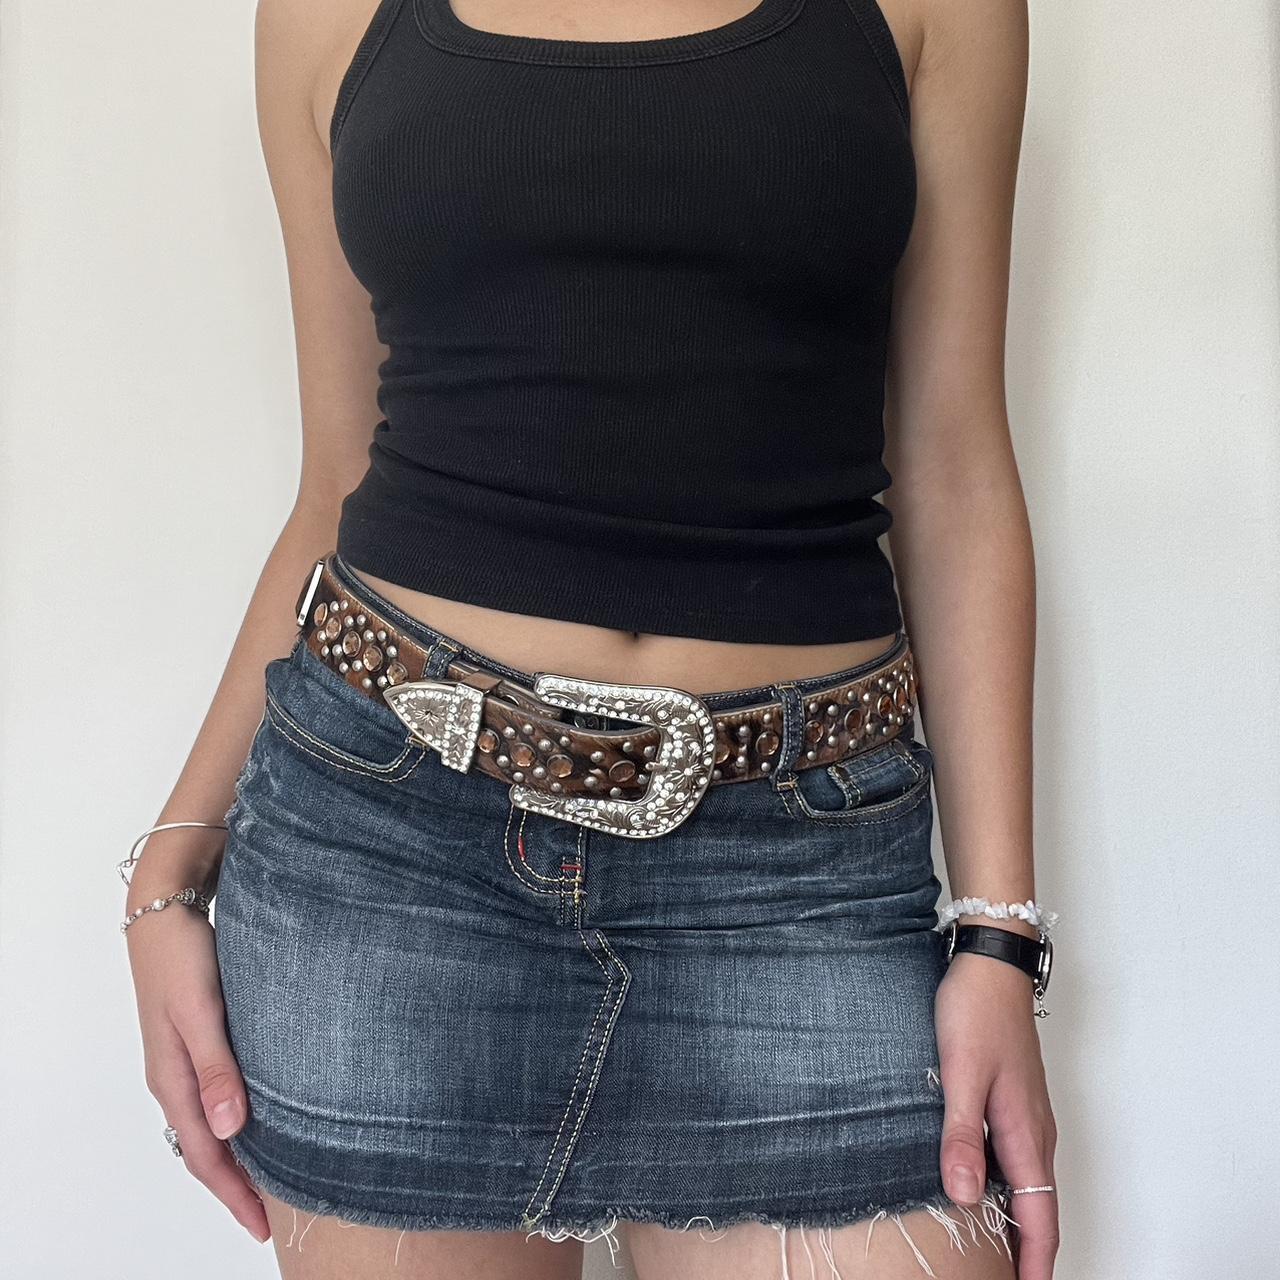 Brown leather cowboy belt 🤠 Gorgeous detailing and... - Depop